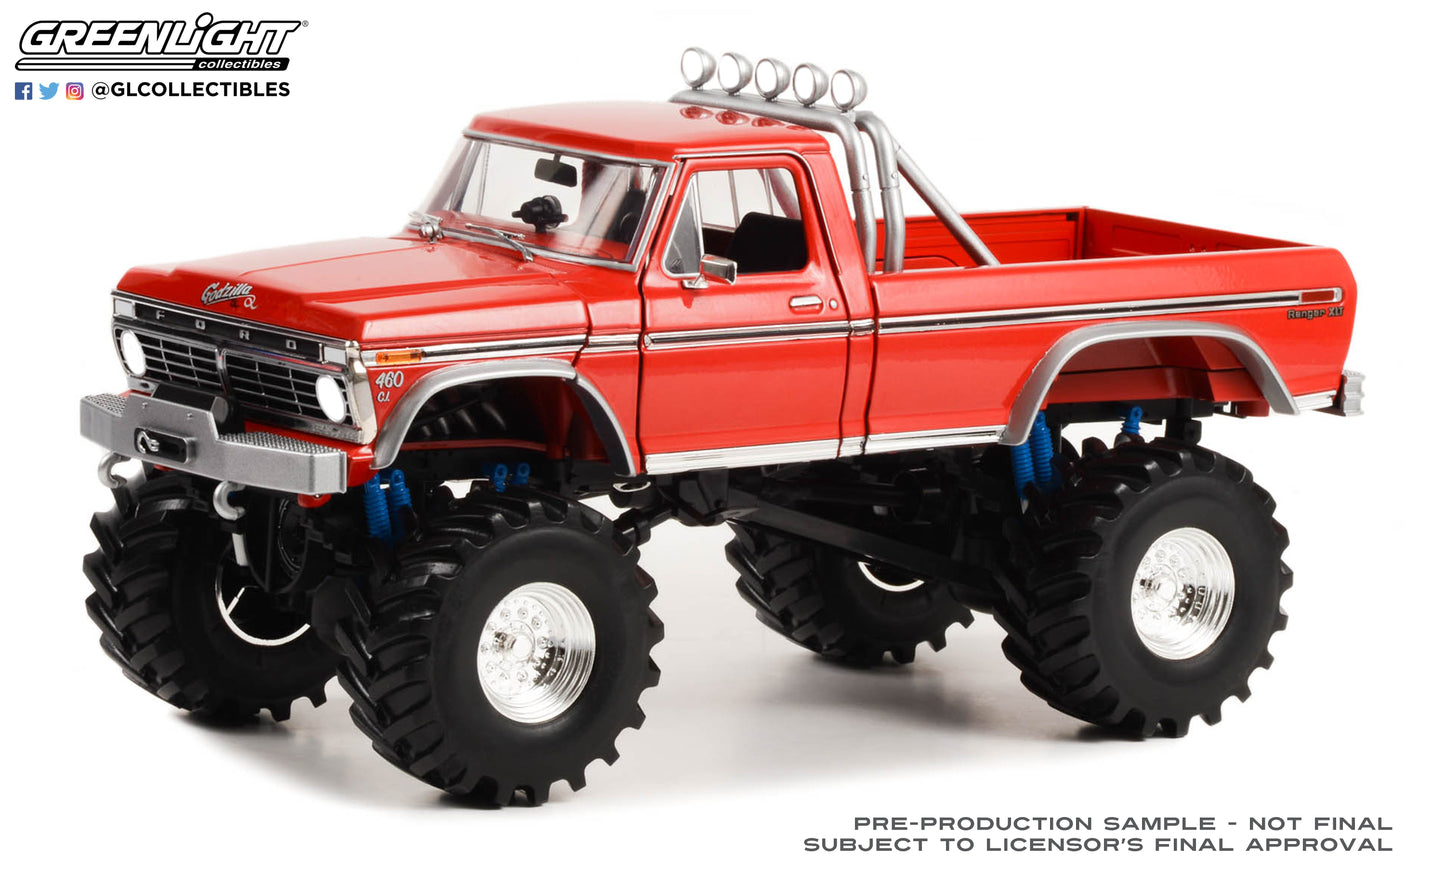 GreenLight 1:18 Kings of Crunch - Godzilla - 1974 Ford F-250 Monster Truck with 48-Inch Tires 13646